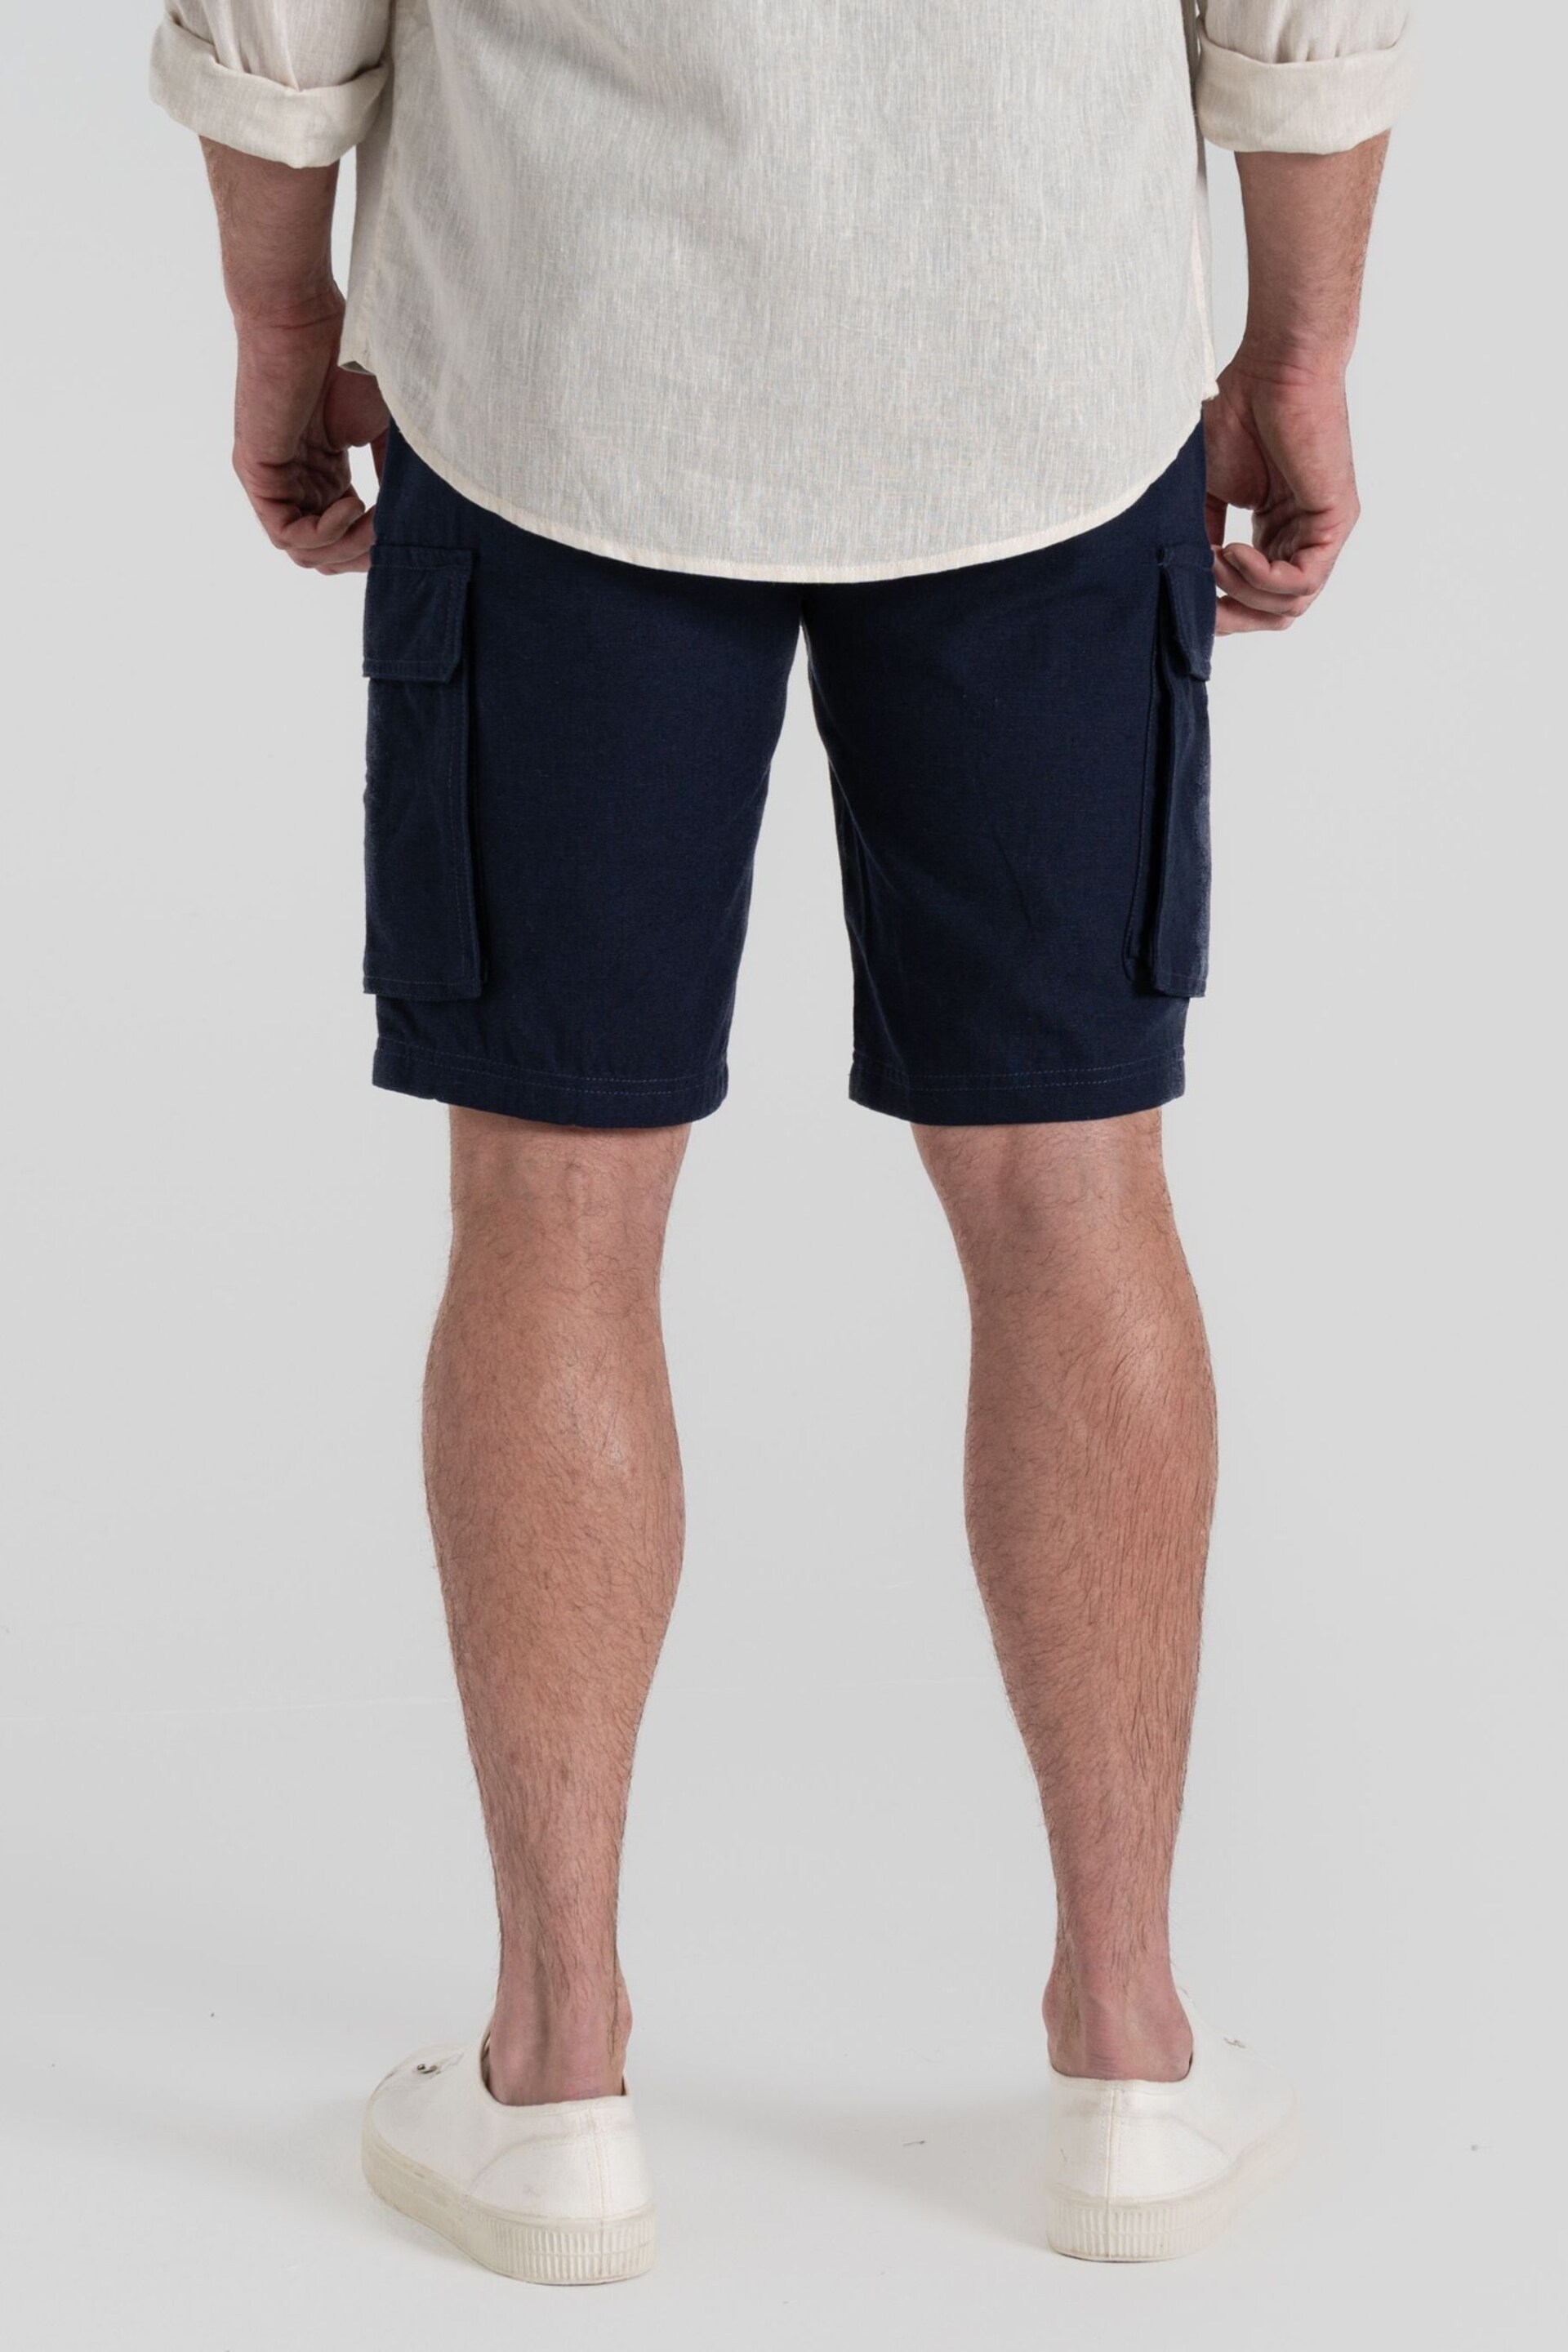 Craghoppers Blue Howle Shorts - Image 2 of 7